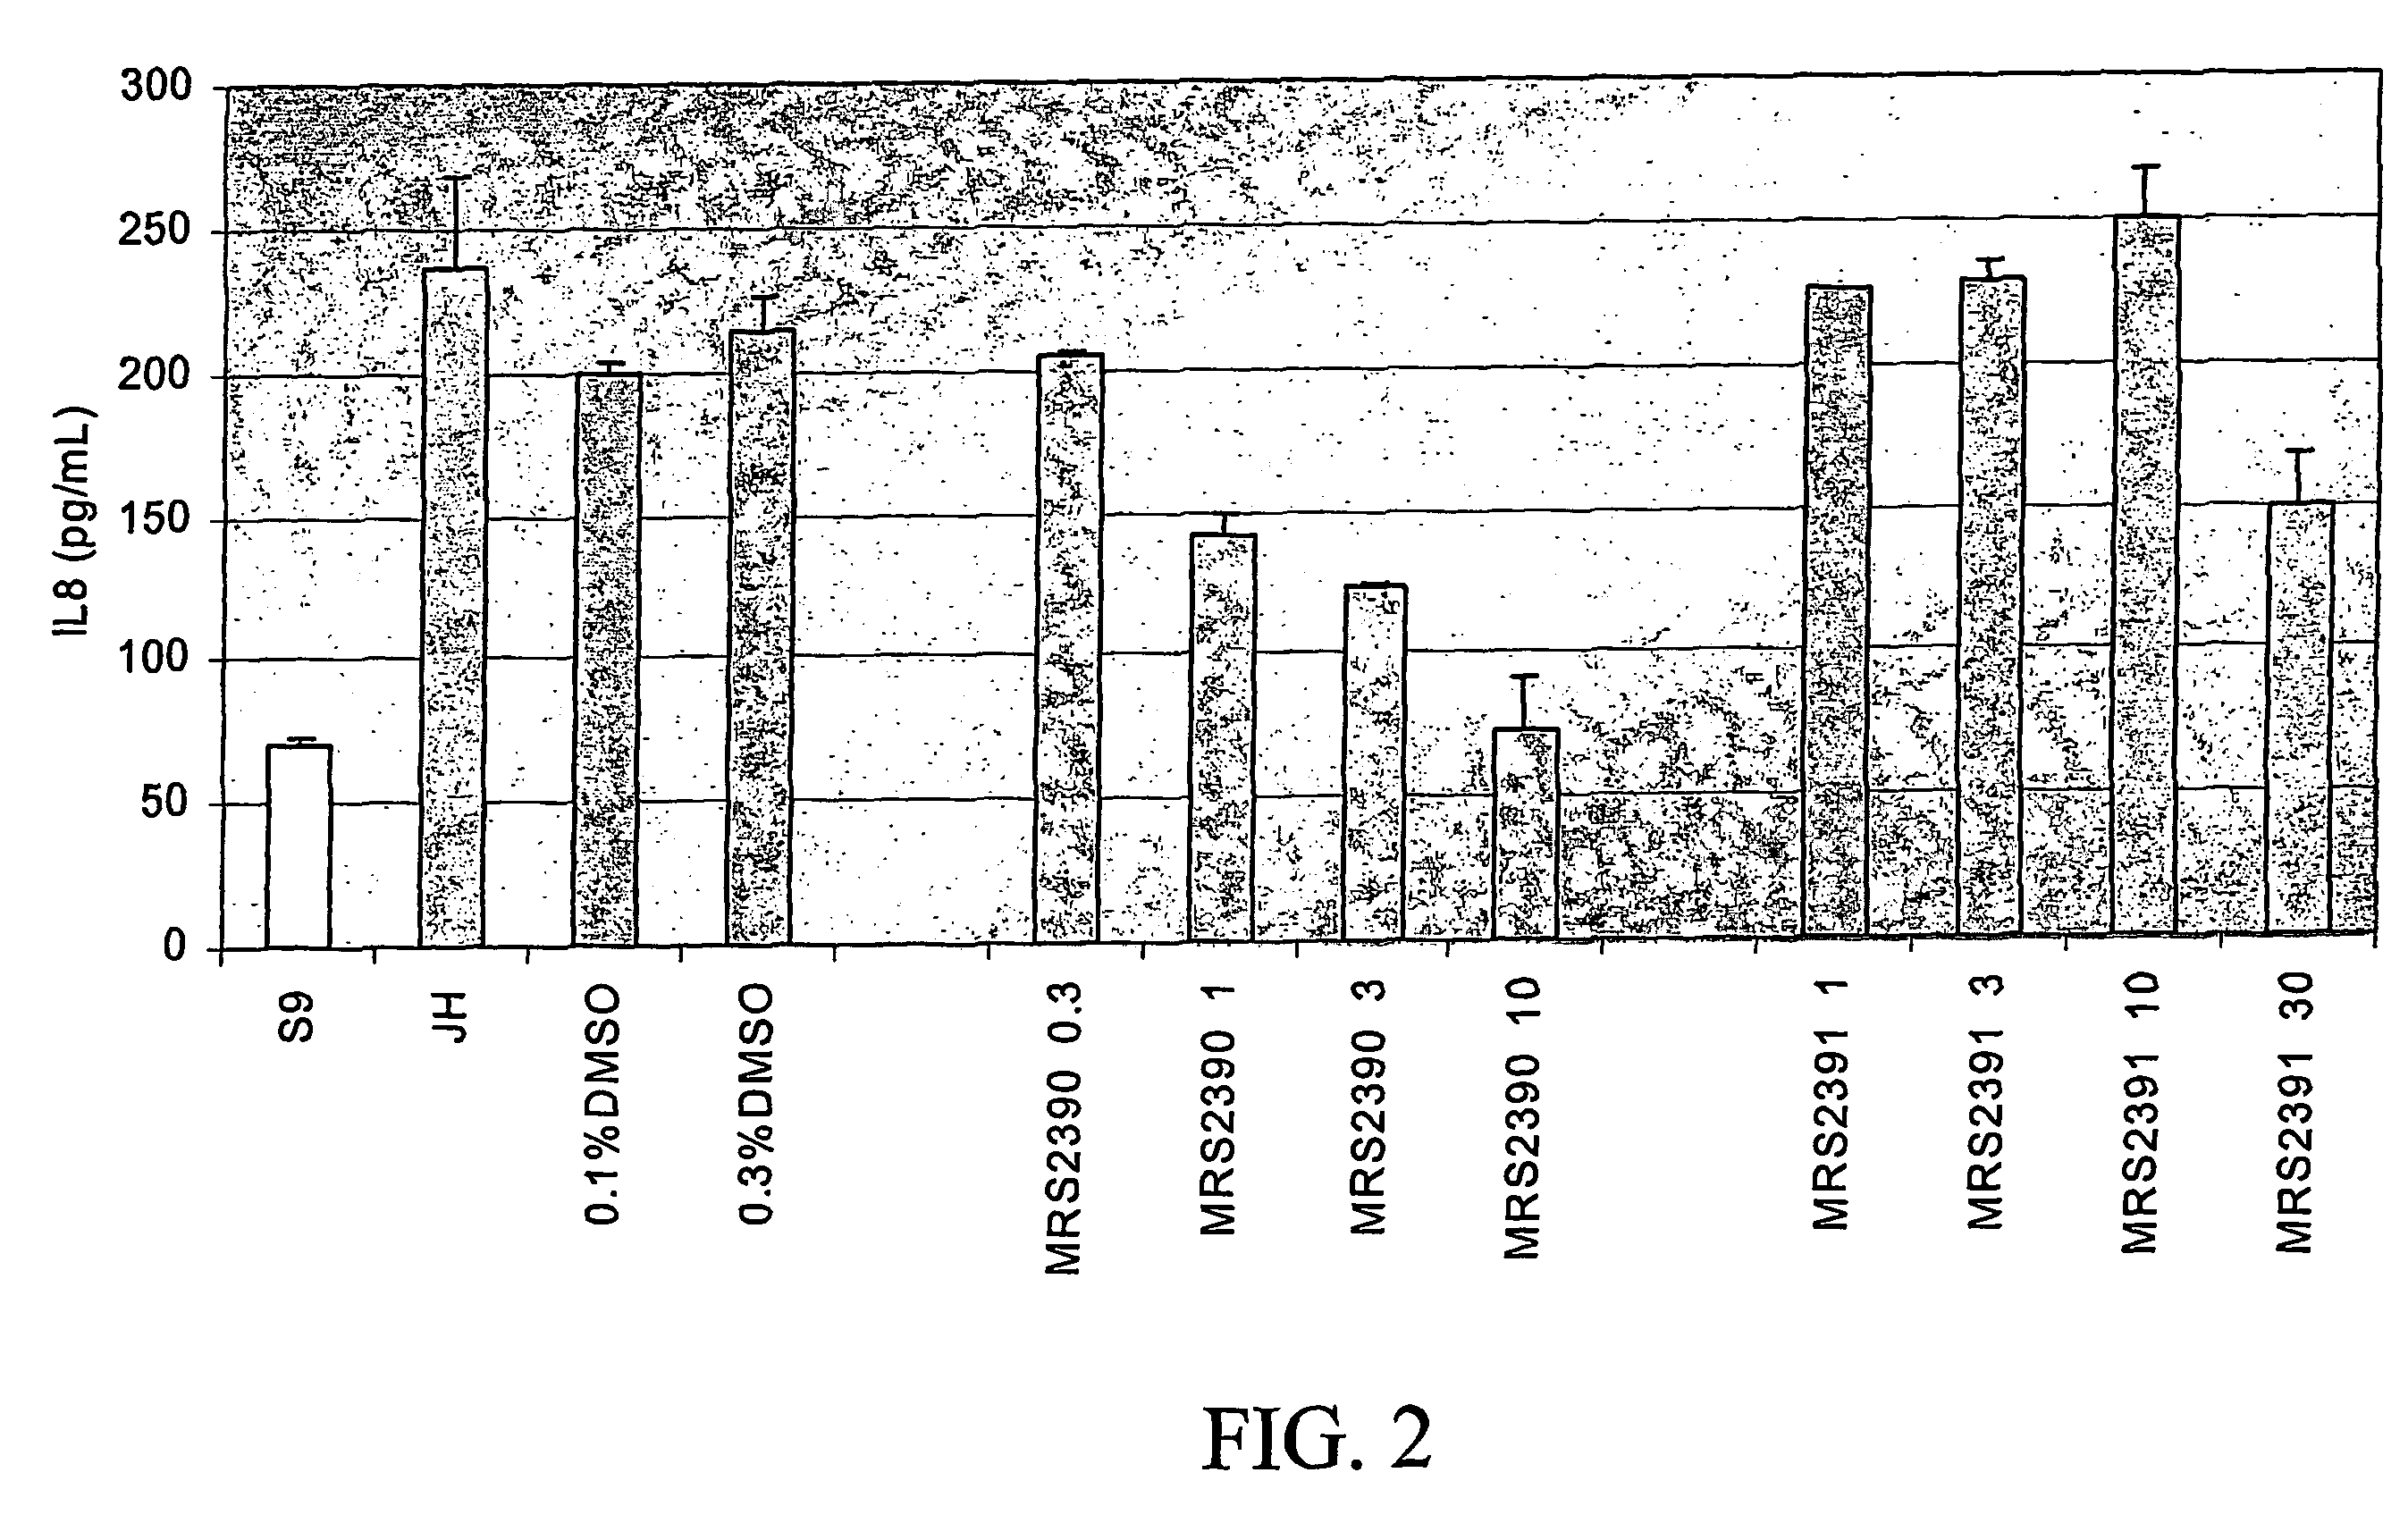 Amphiphilic pyridinium compounds, method of making and use thereof